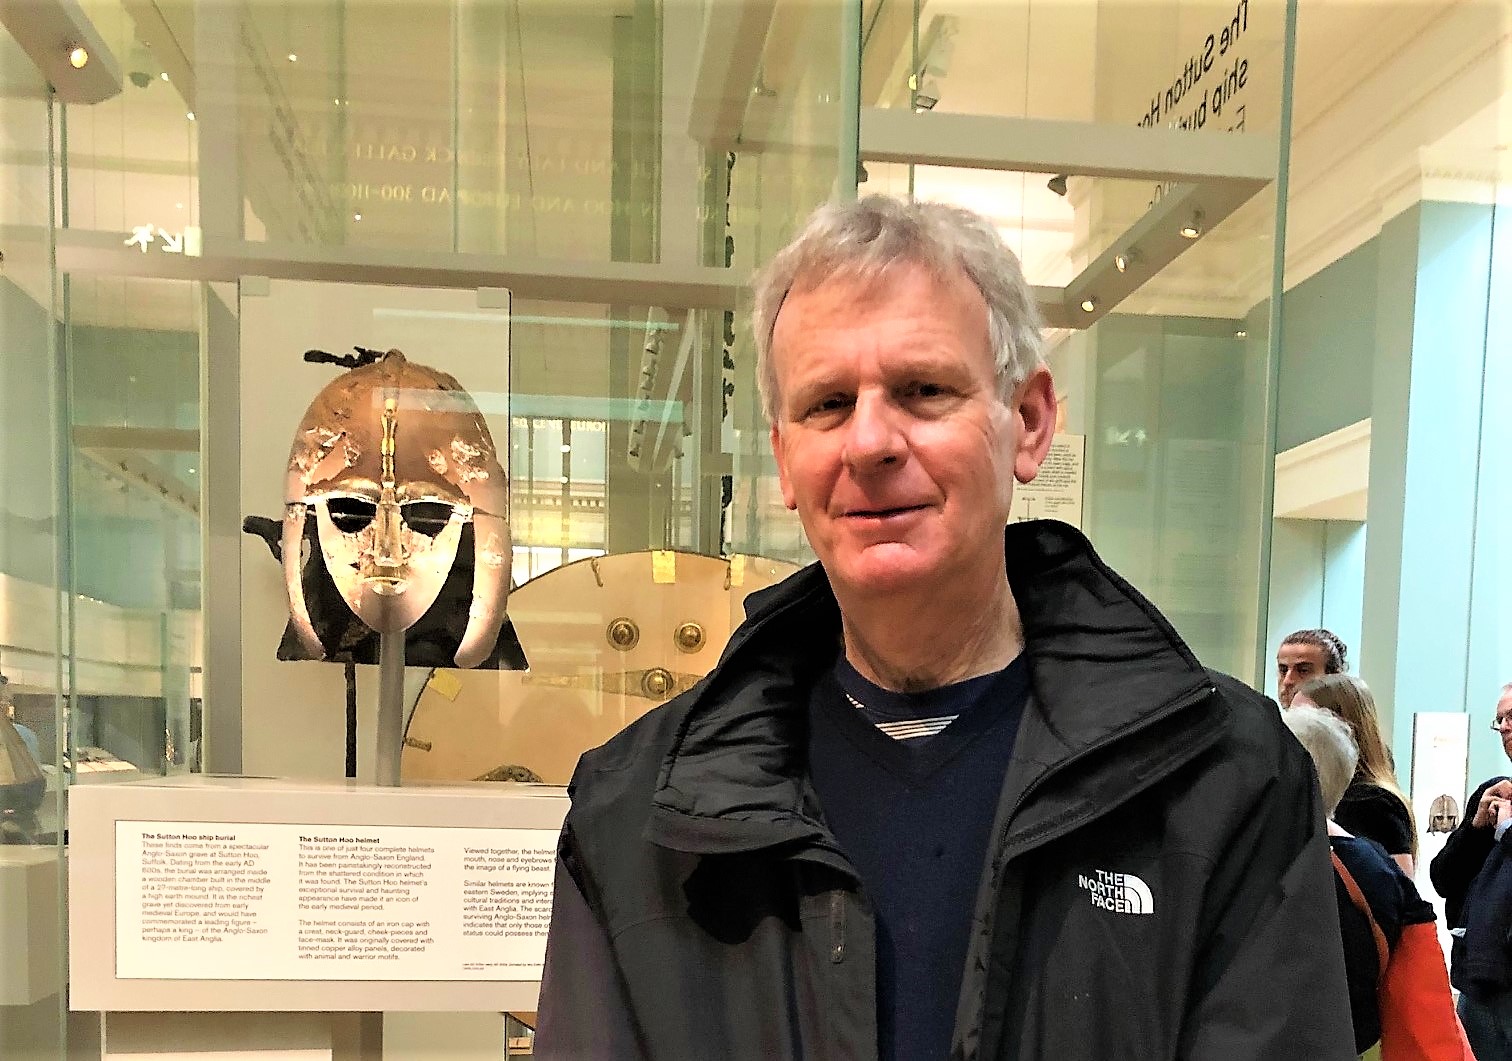 Roger and the Sutton Hoo Helmet - Roger is on the right